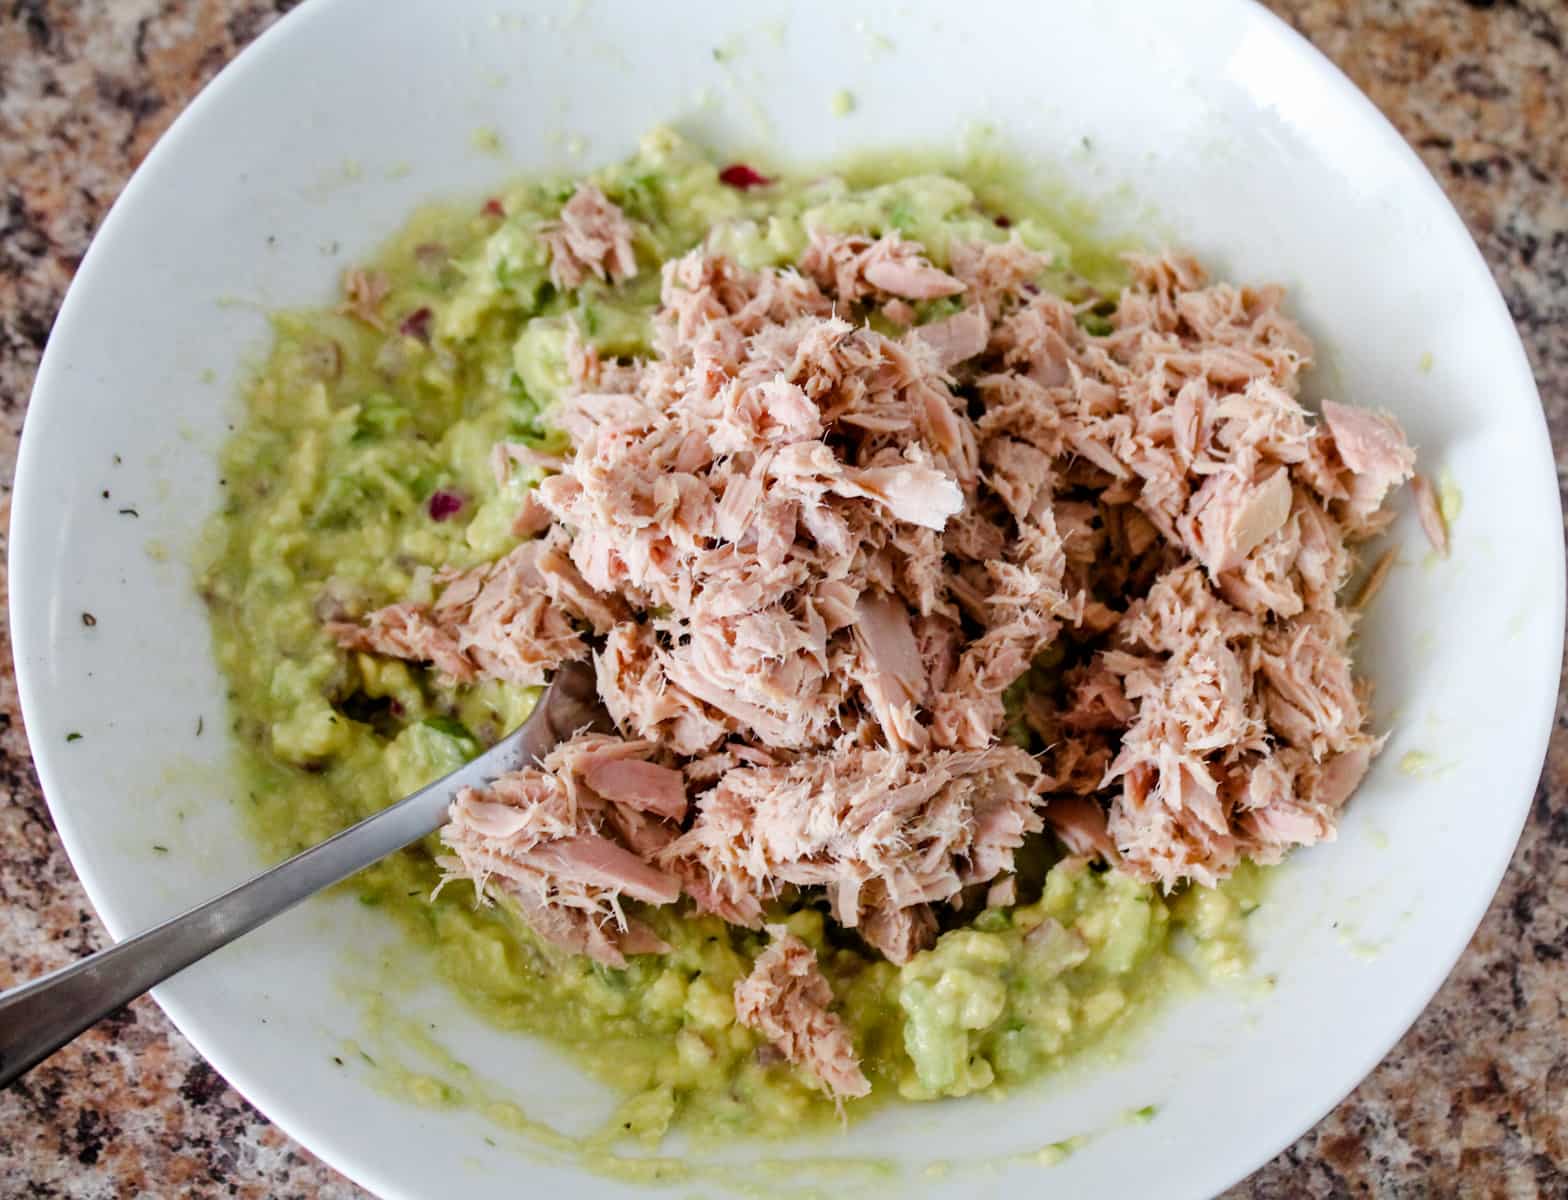 tuna on top of mashed avocado in a bowl.